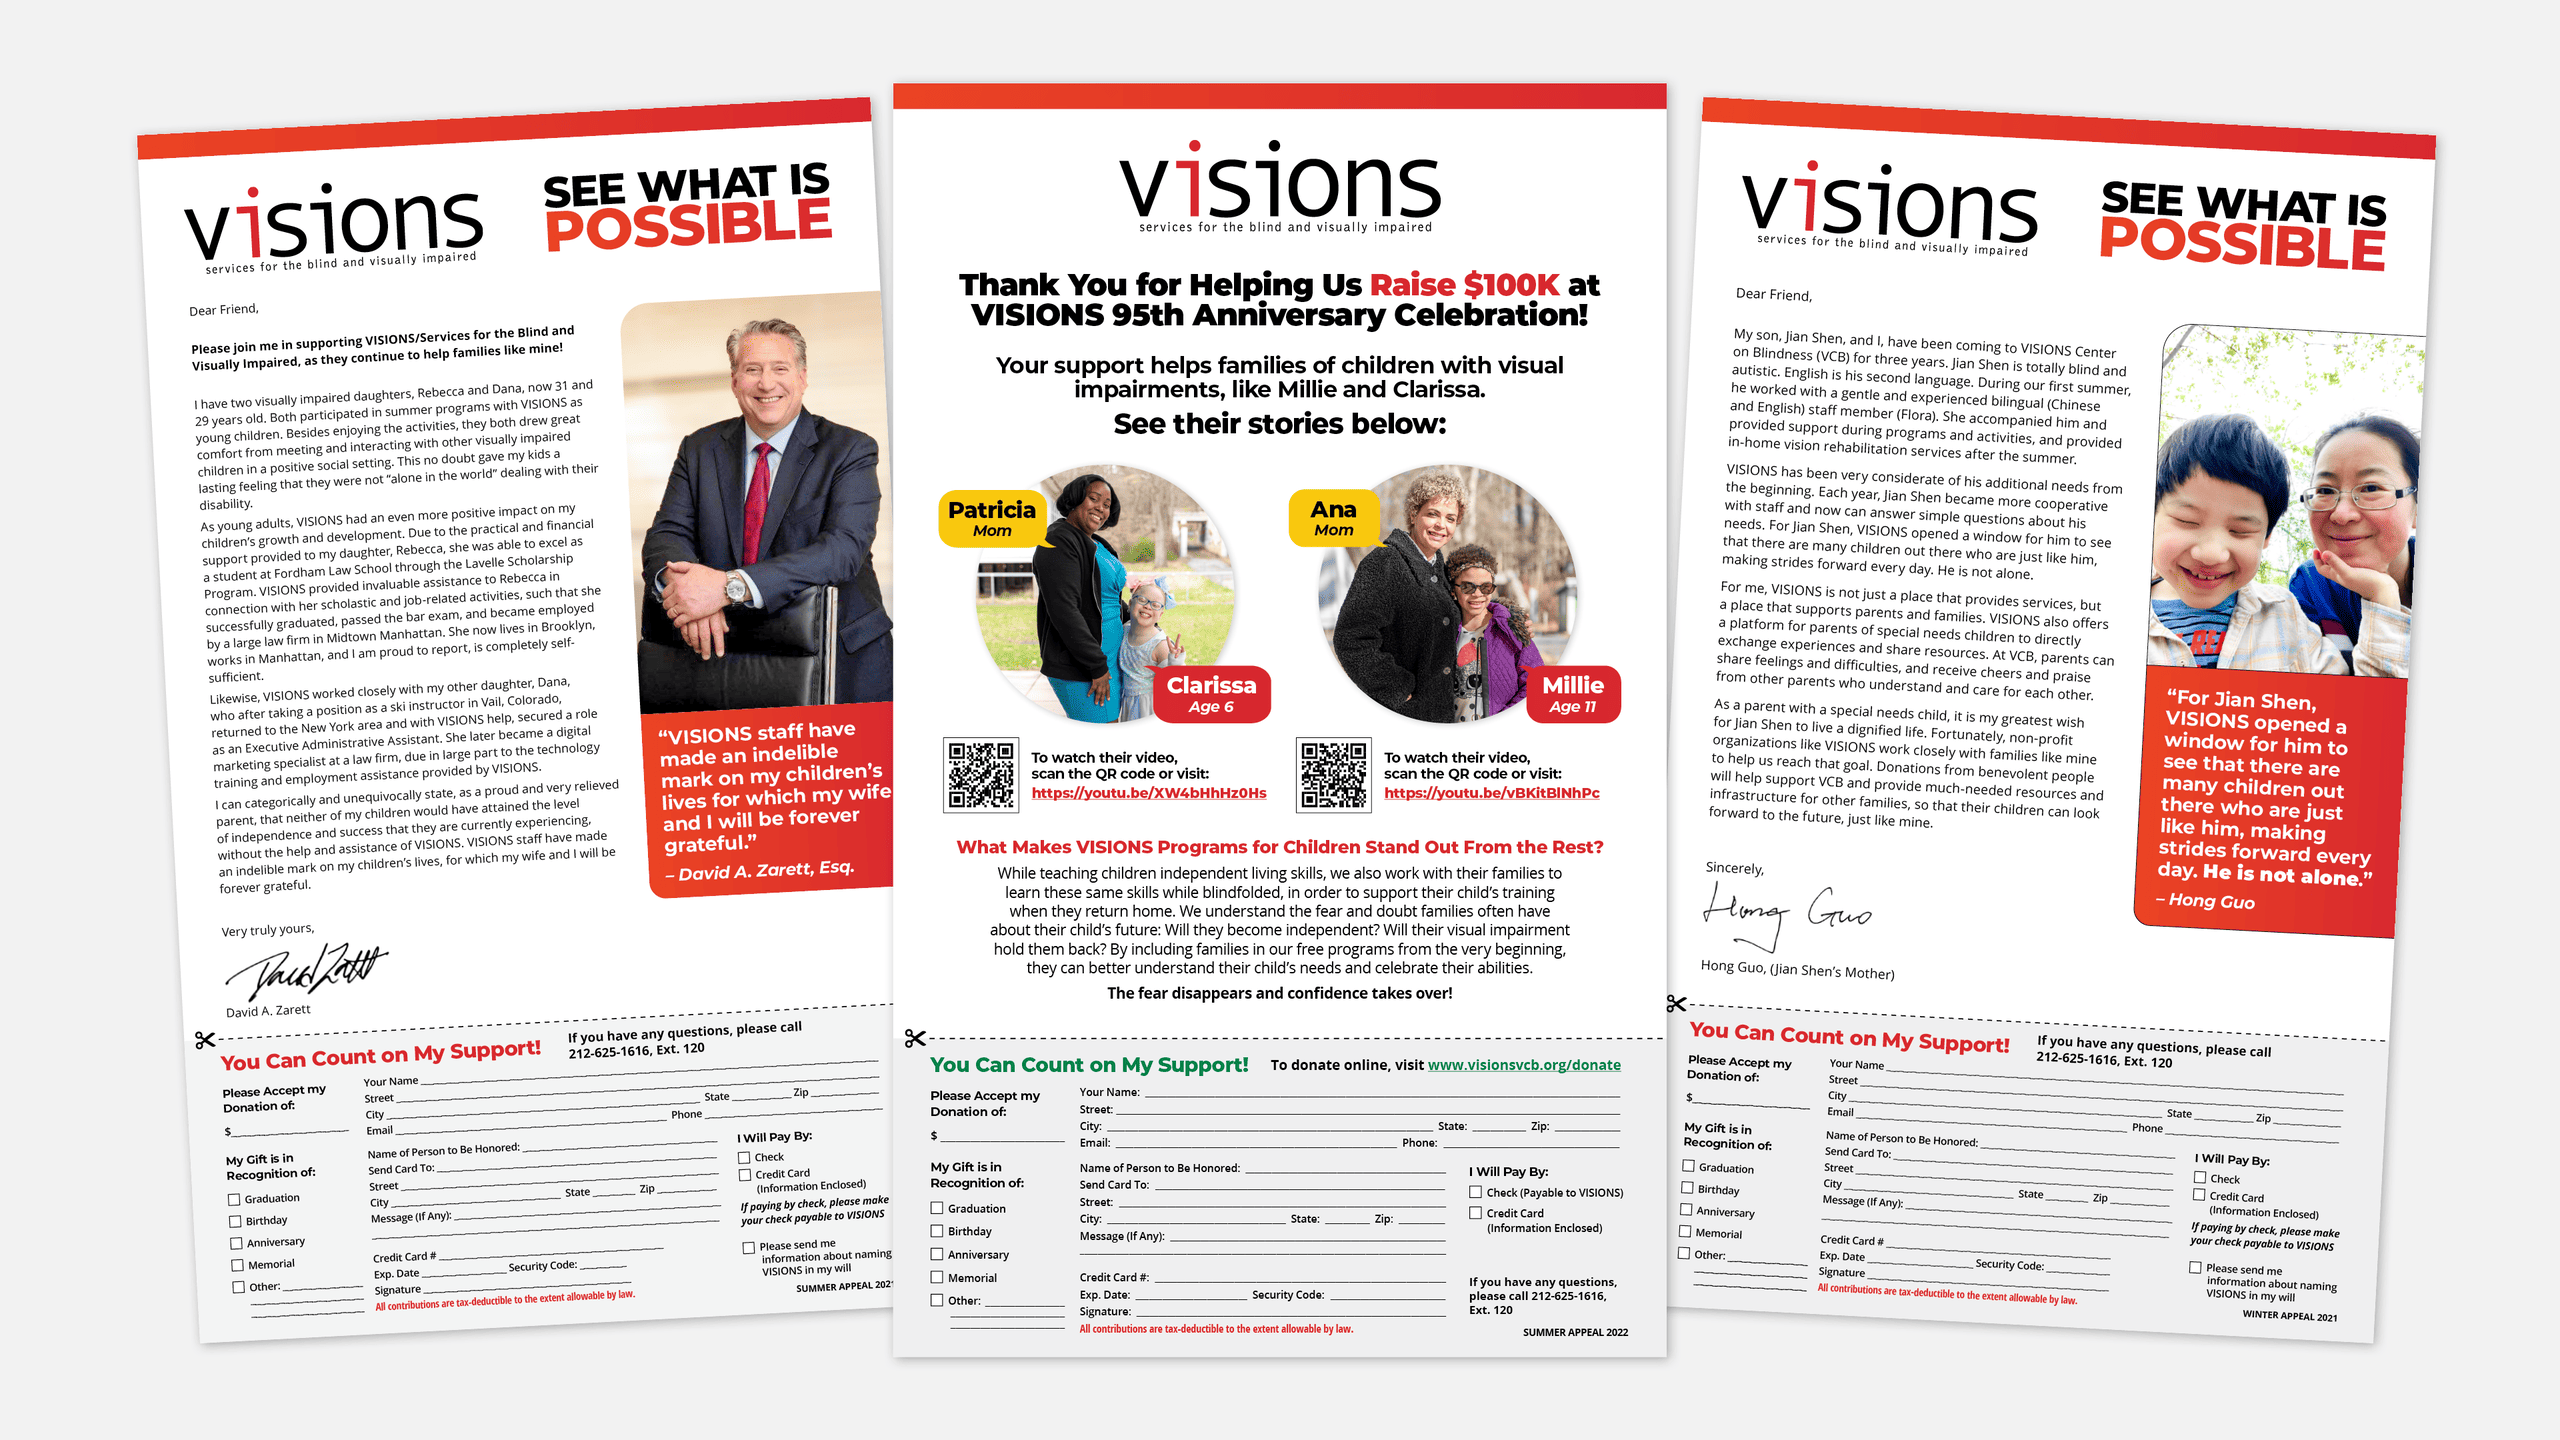 Mockups of different designs of VISIONS seasonal mail appeals, featuring stories of families who benefitted from the services they received.